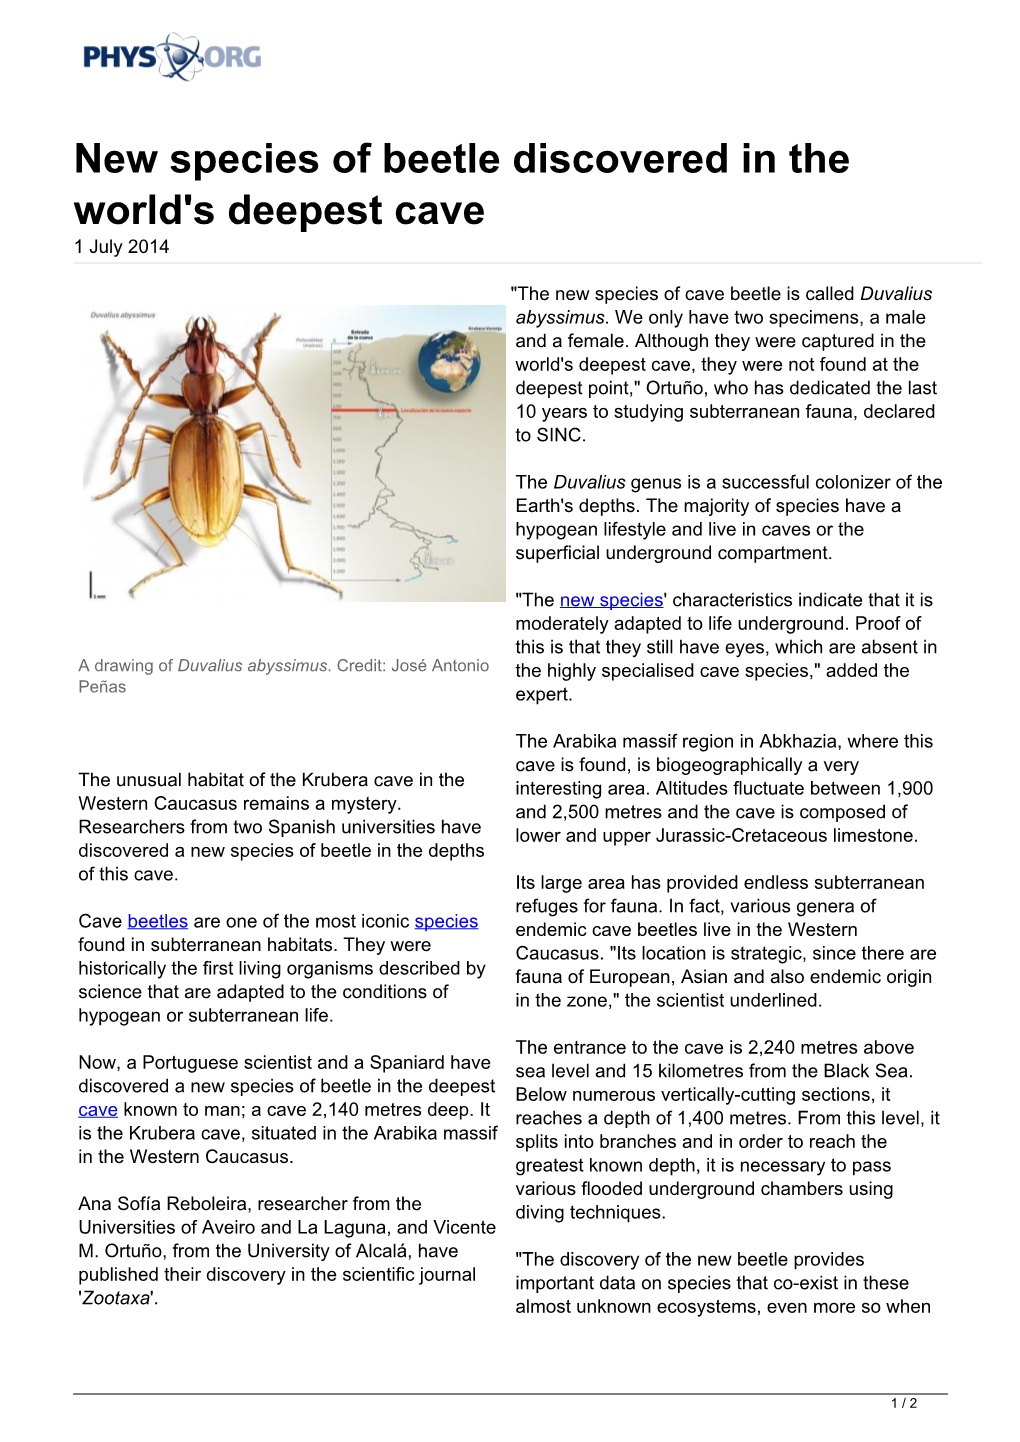 New Species of Beetle Discovered in the World's Deepest Cave 1 July 2014